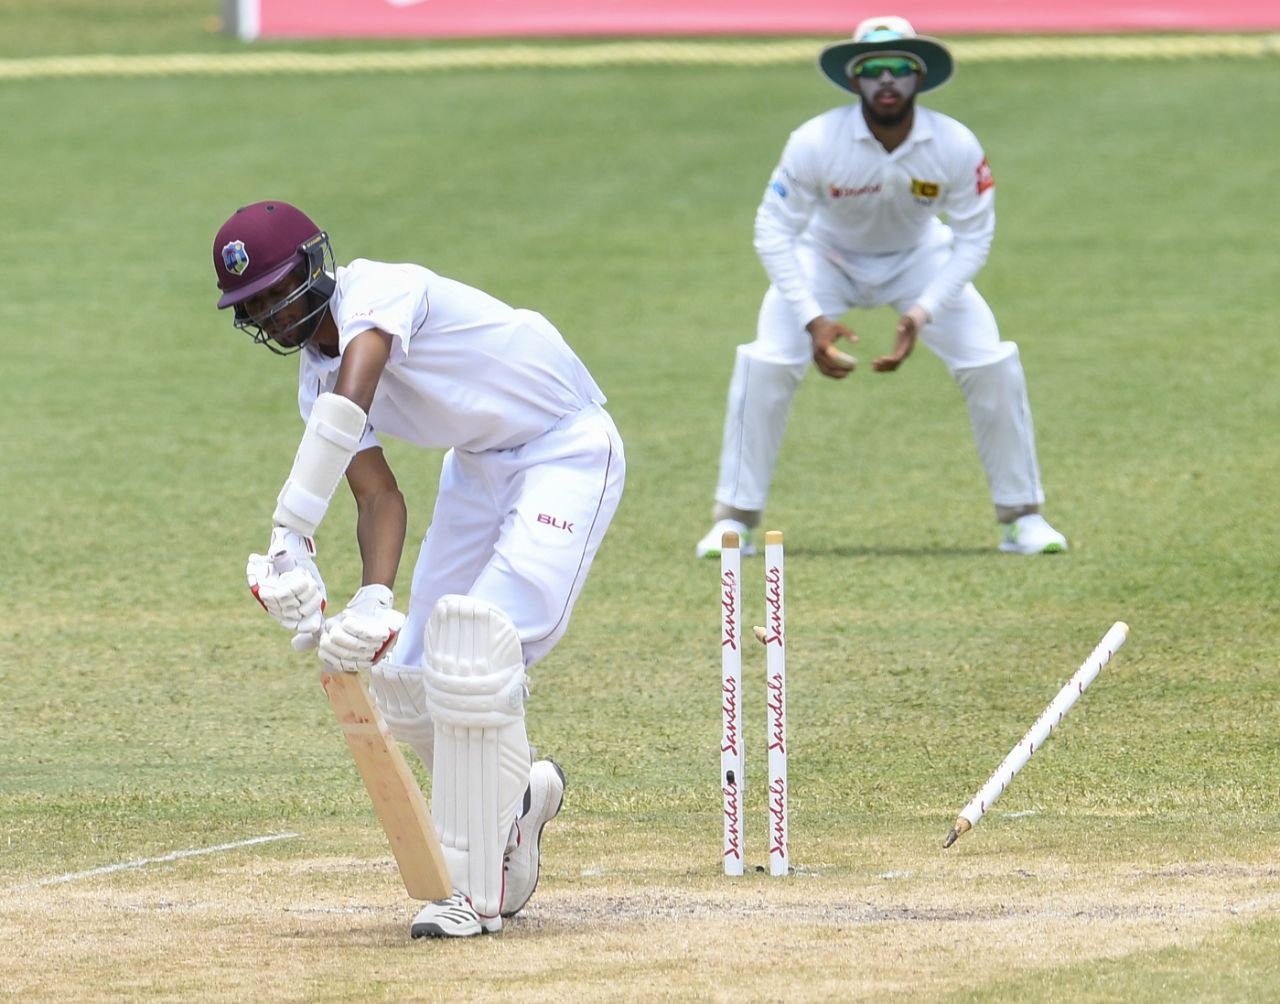 Roston Chase loses his stumps to Suranga Lakmal, West Indies v Sri Lanka, 2nd Test, St Lucia, 5th day, June 18, 2018